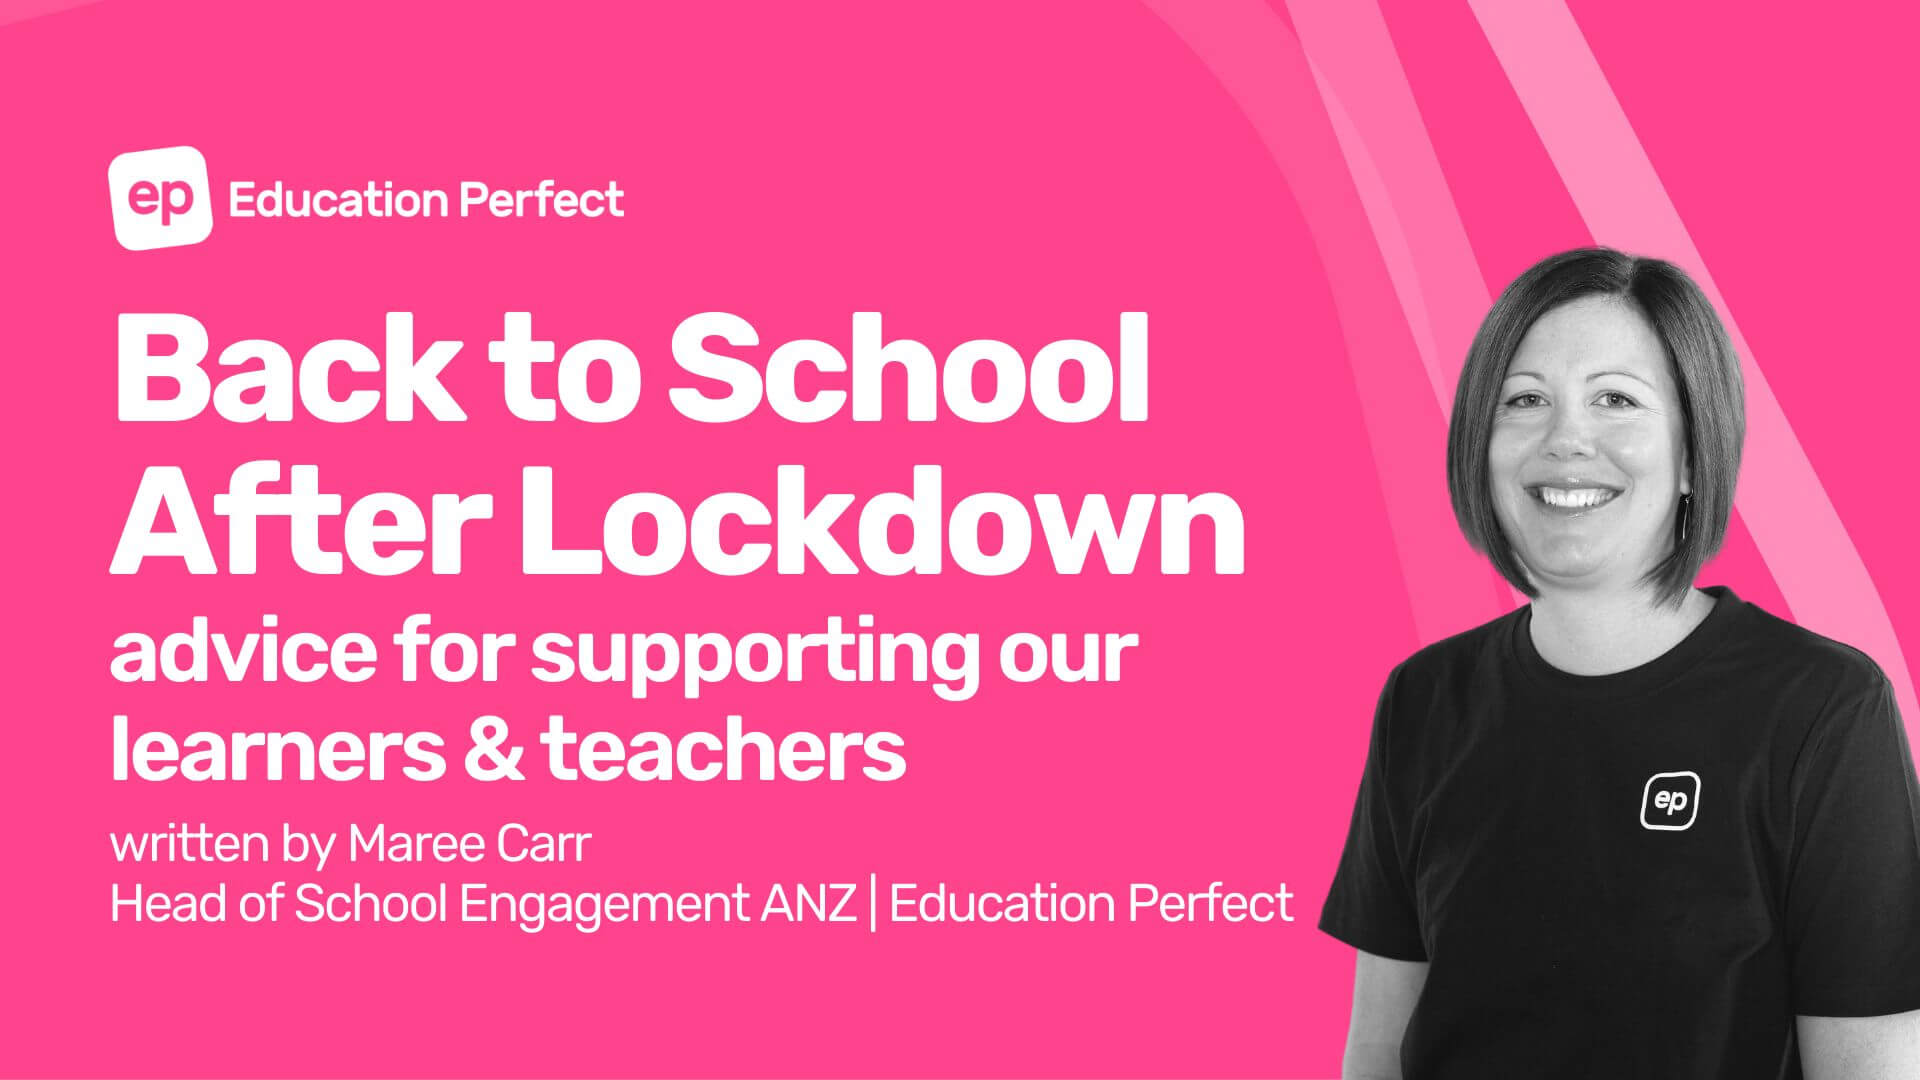 Back to School After Lockdown: advice for supporting our learners & teachers